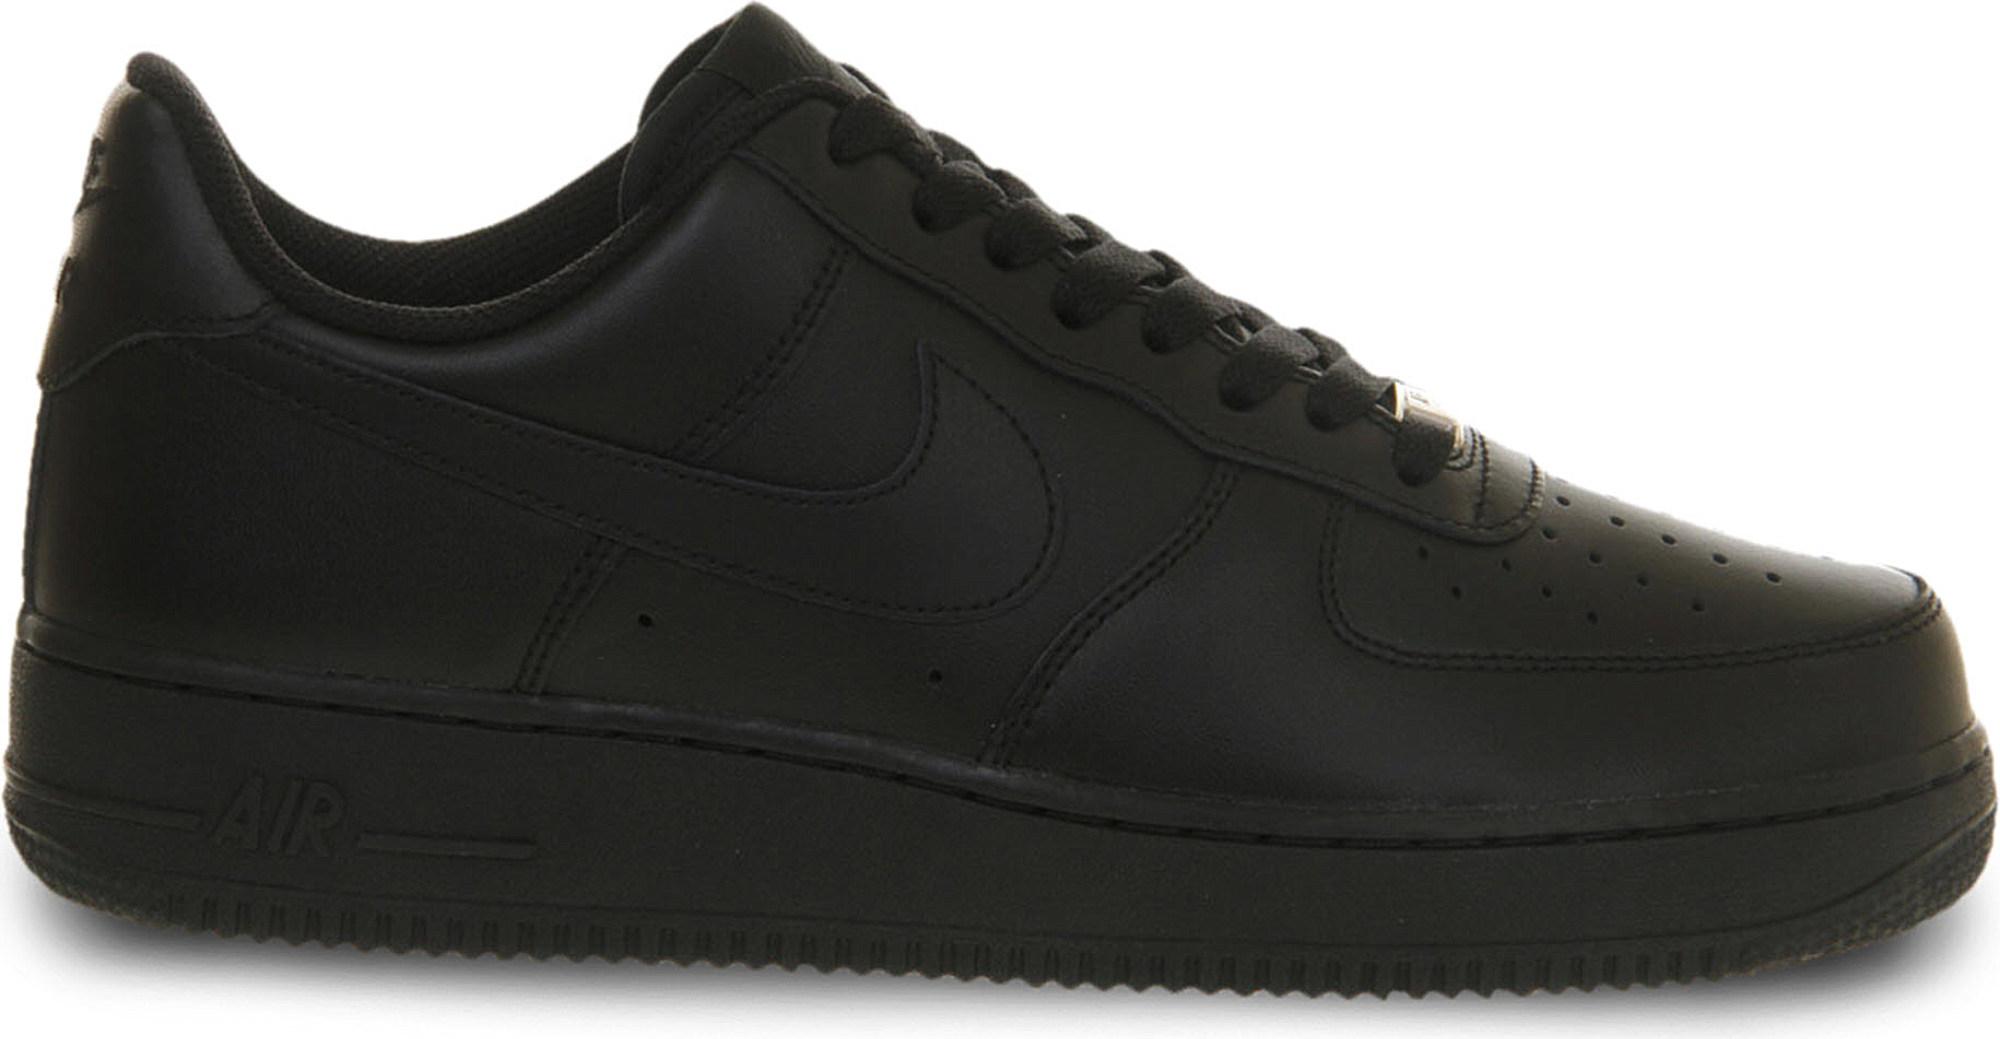 Low Top Air Force Ones Black - Airforce Military